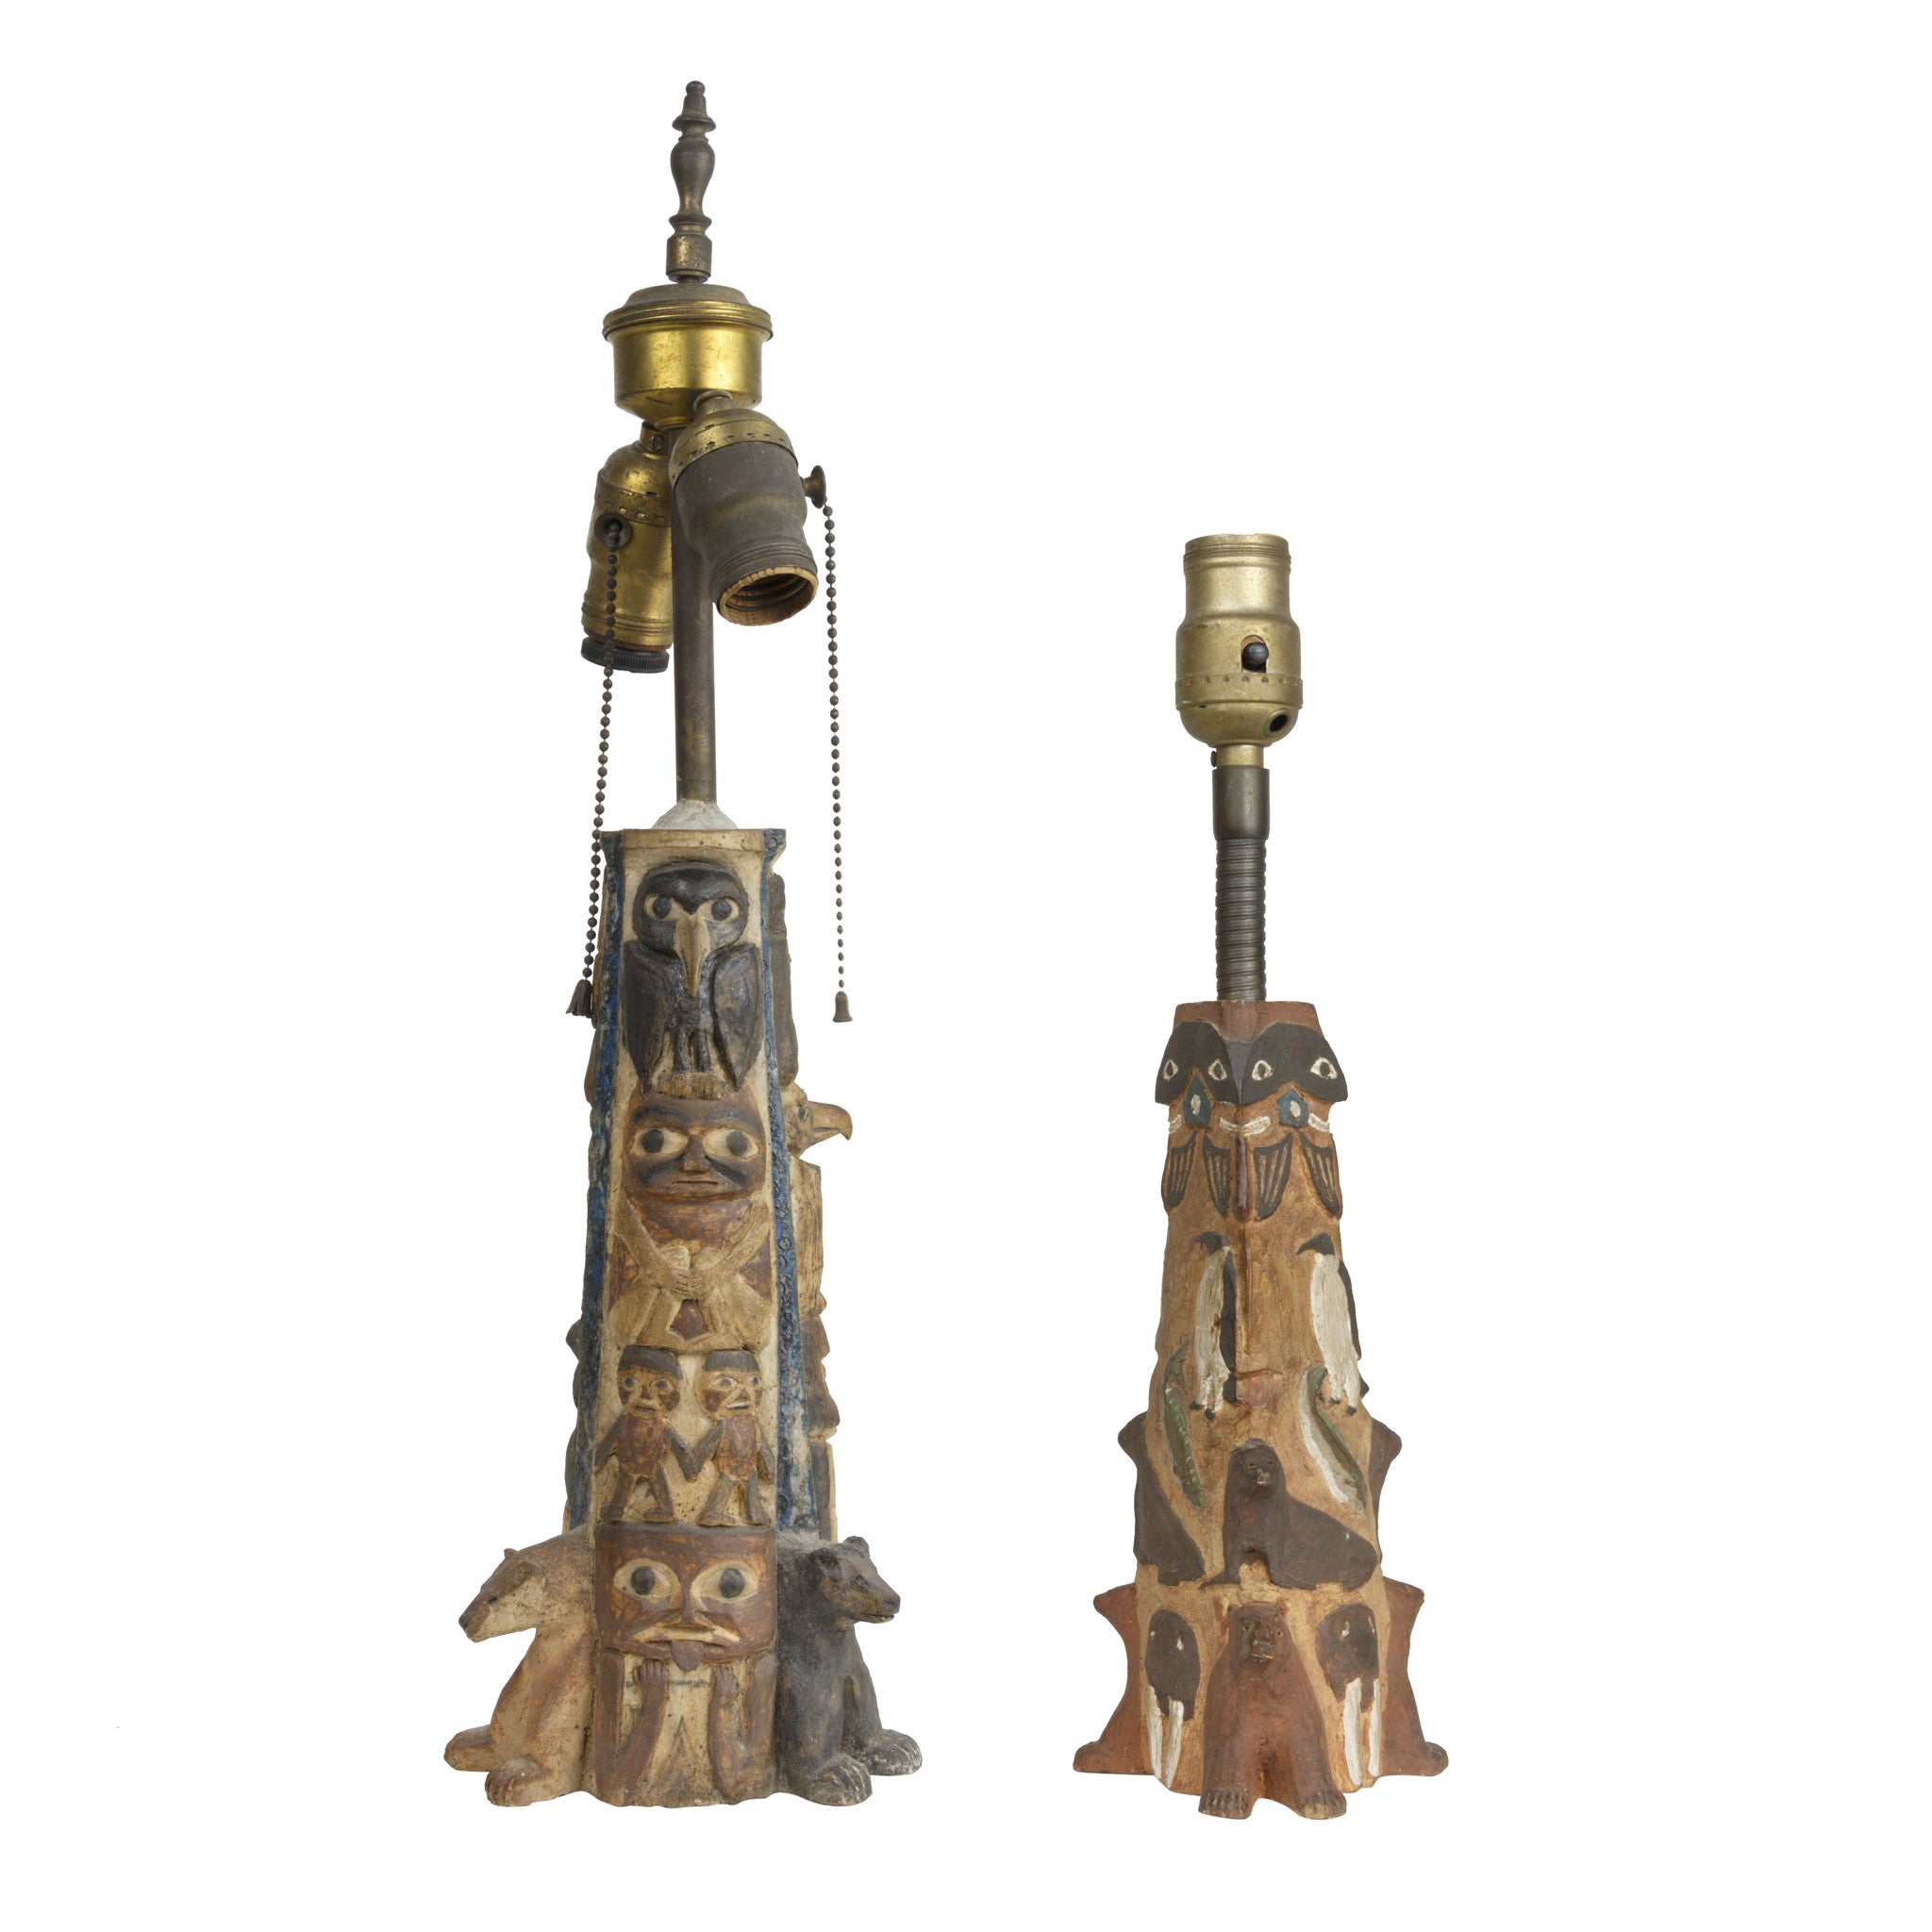 Native Folk Art Stone Lamps and Totems